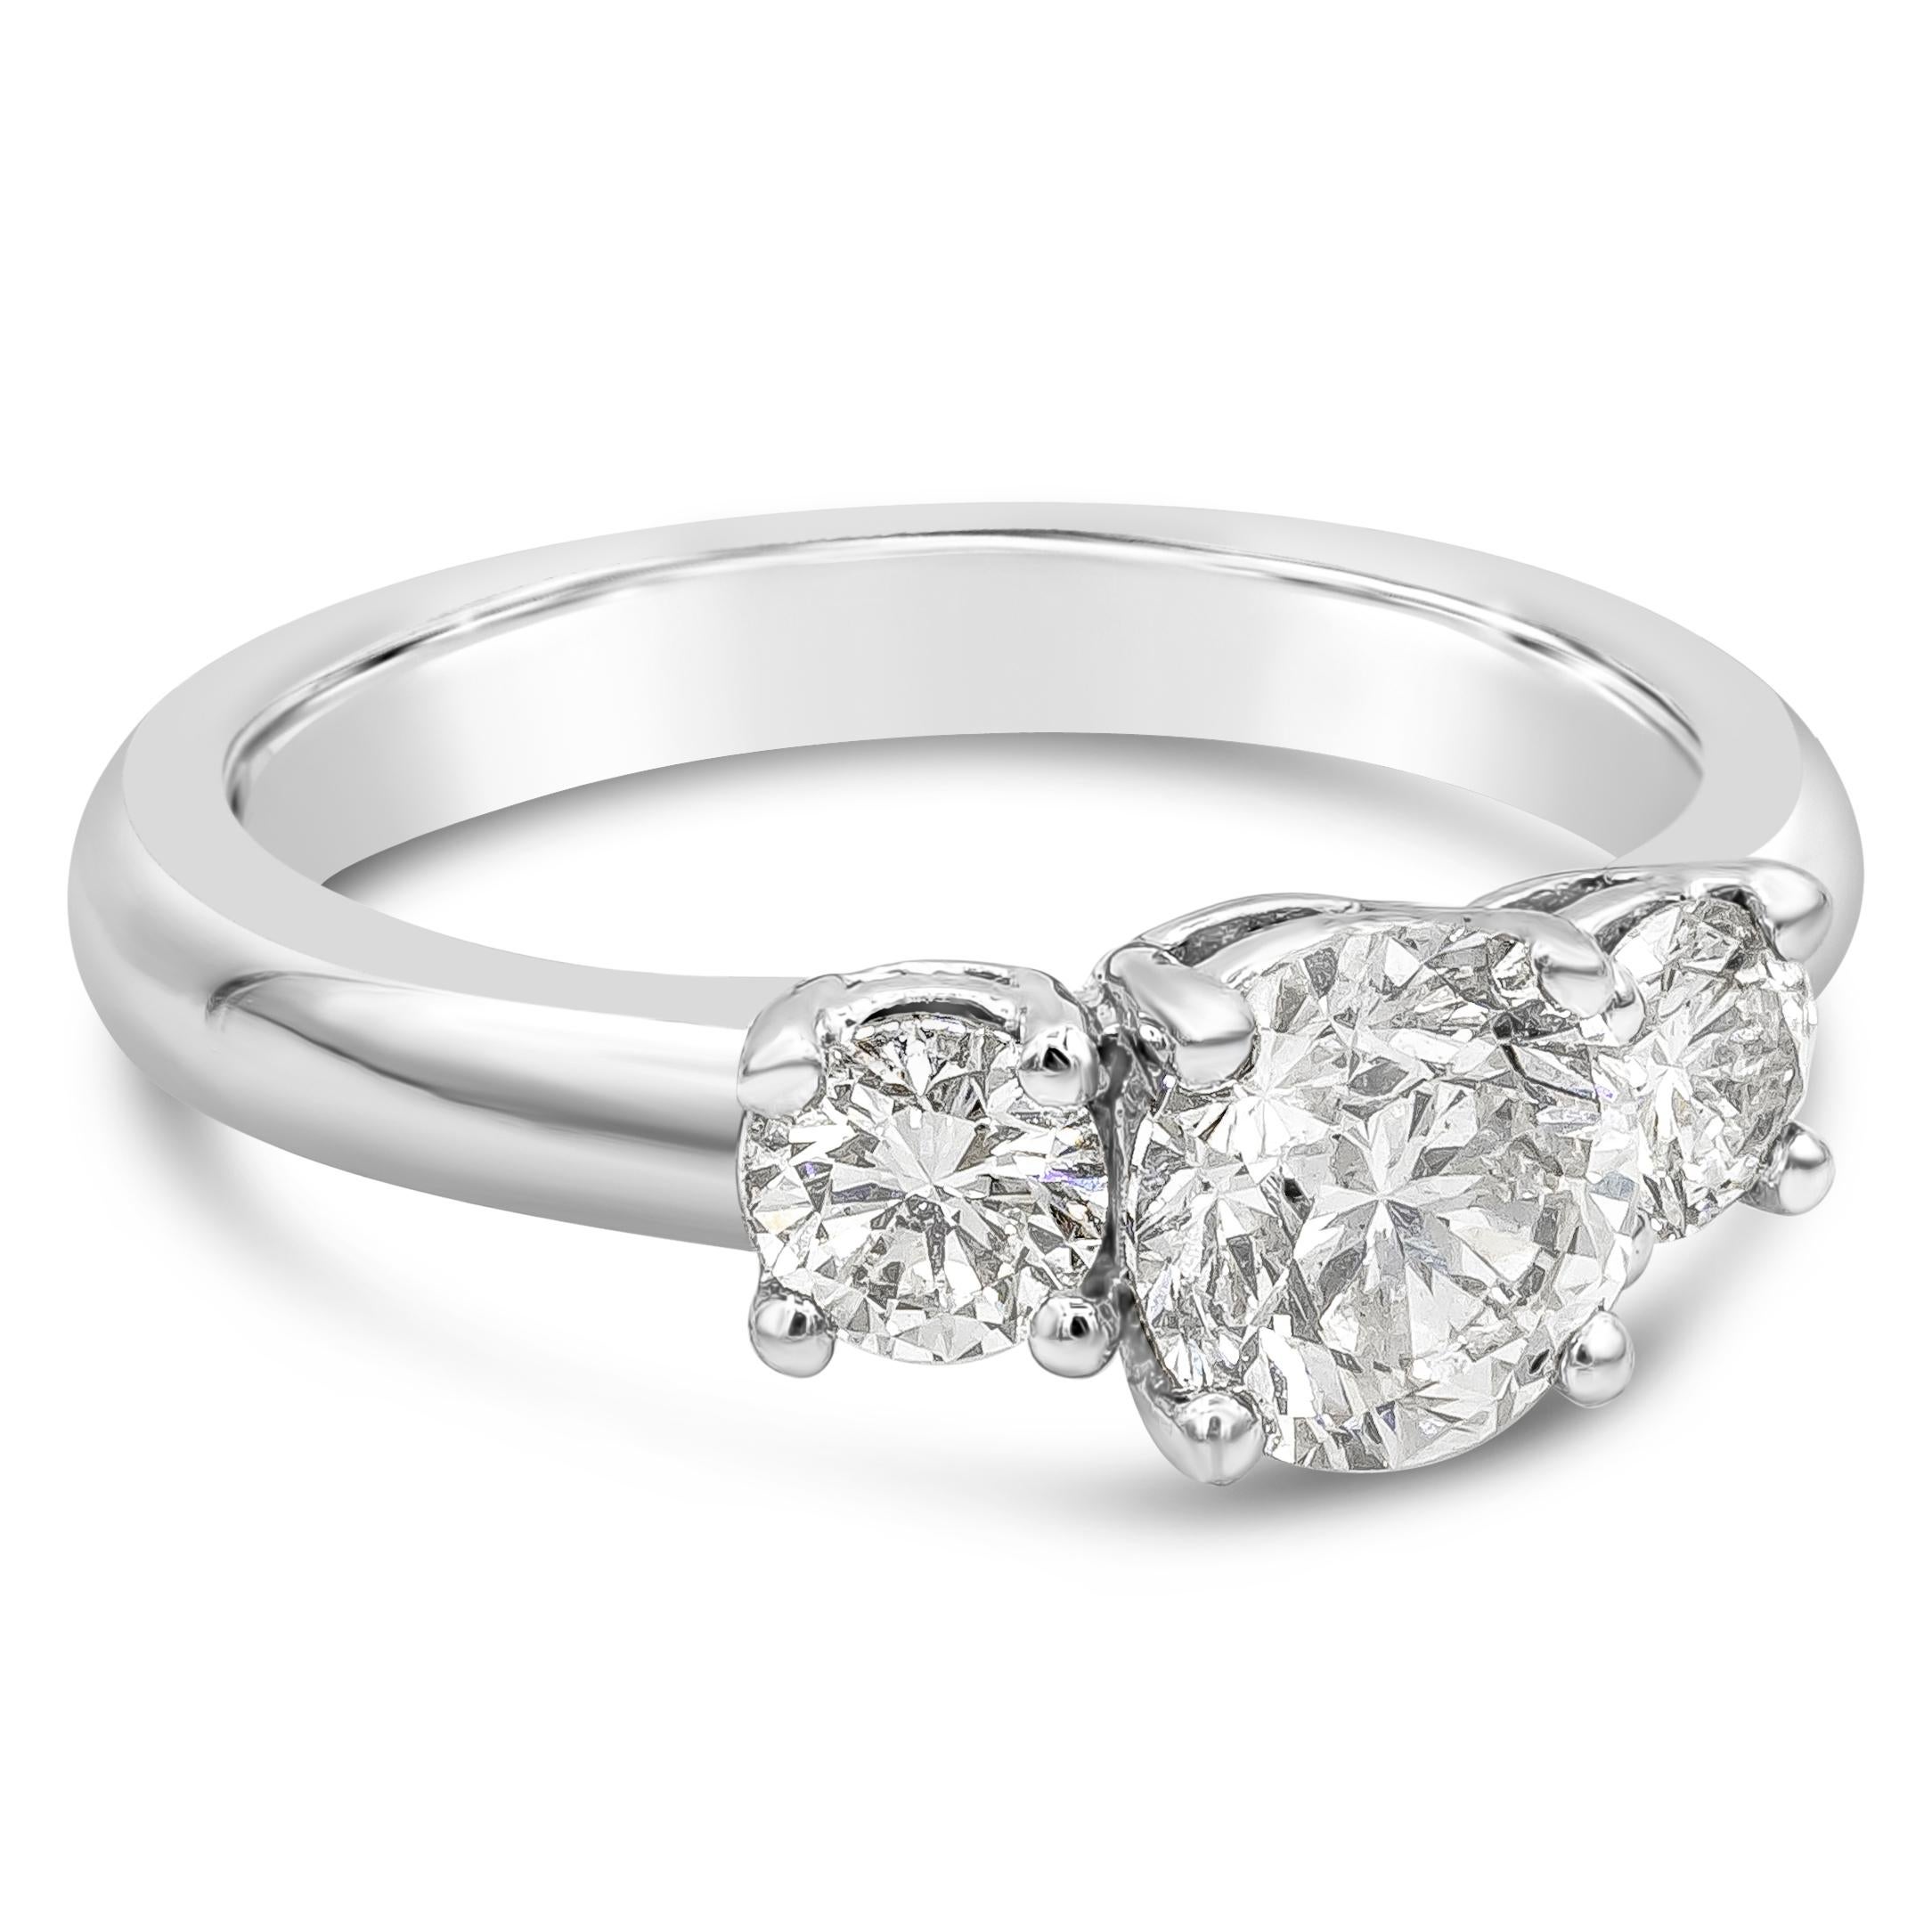 This classy and simple three stone engagement ring showcases a brilliant round diamond center stone weighing 1.03 carats, I color and SI1 in clarity, set in a four prong basket setting. Flanked by two round brilliant diamonds on each side weighing